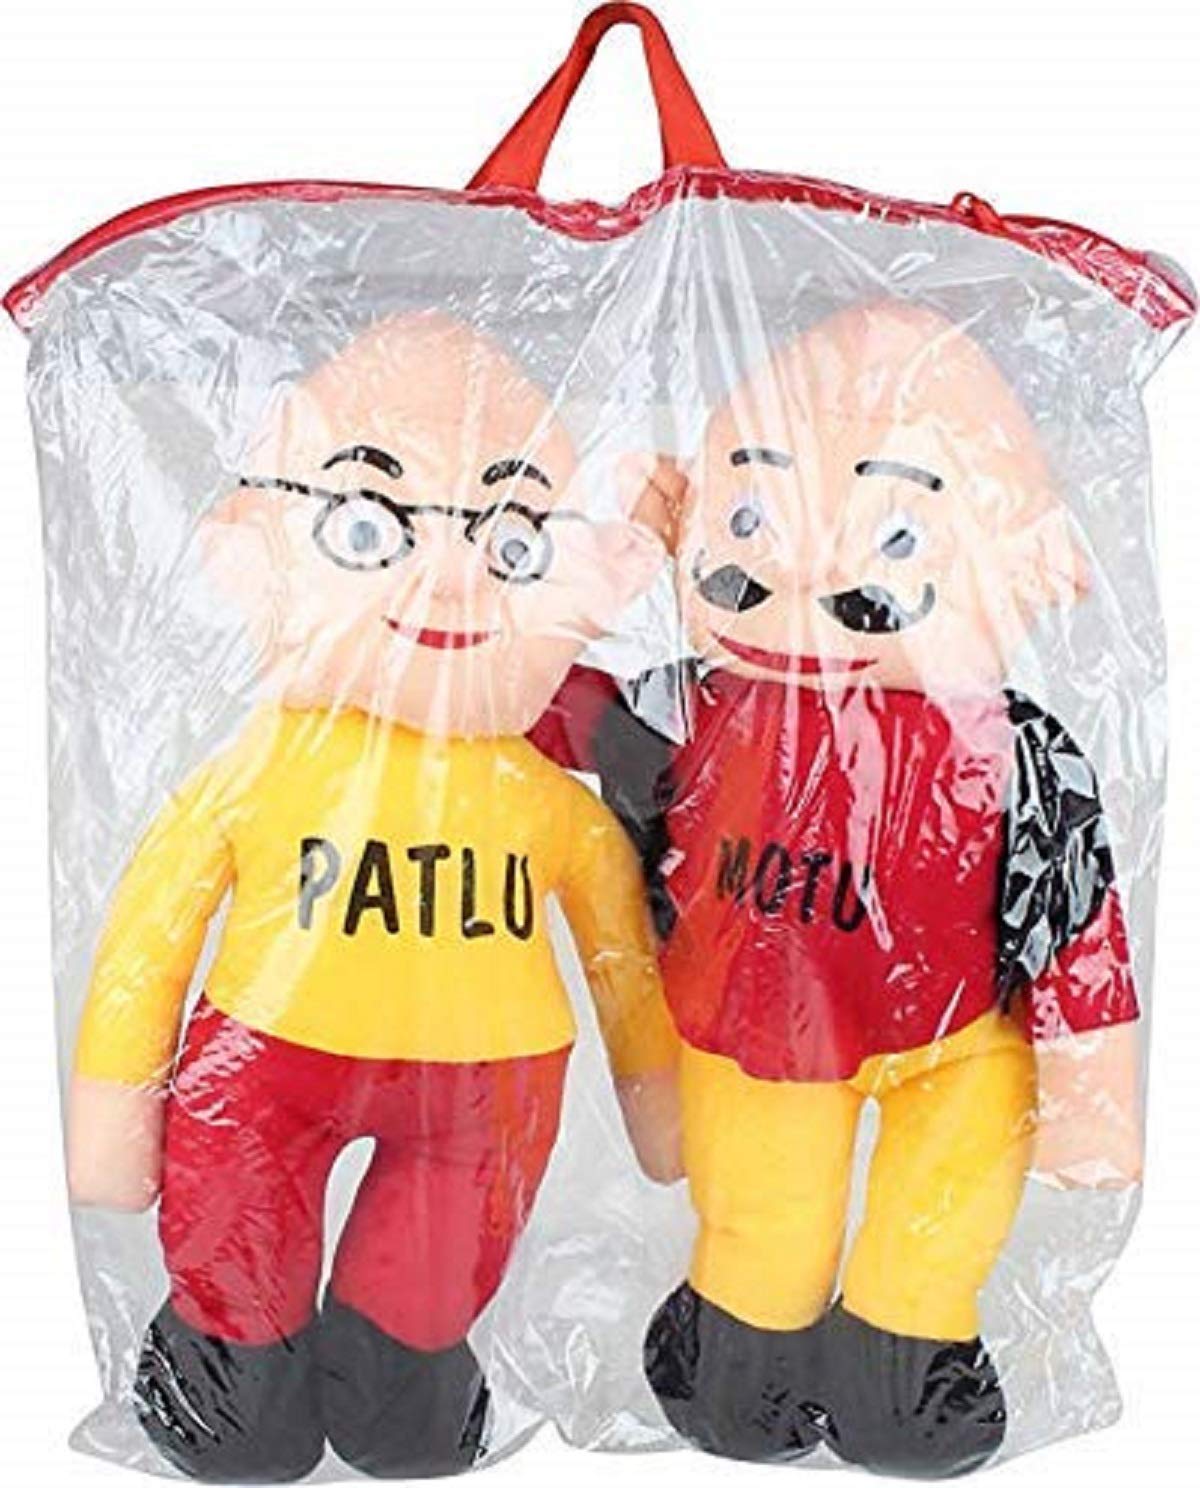 Feathers-Nature’s Touch Motu Patlu Soft Toy for Kids